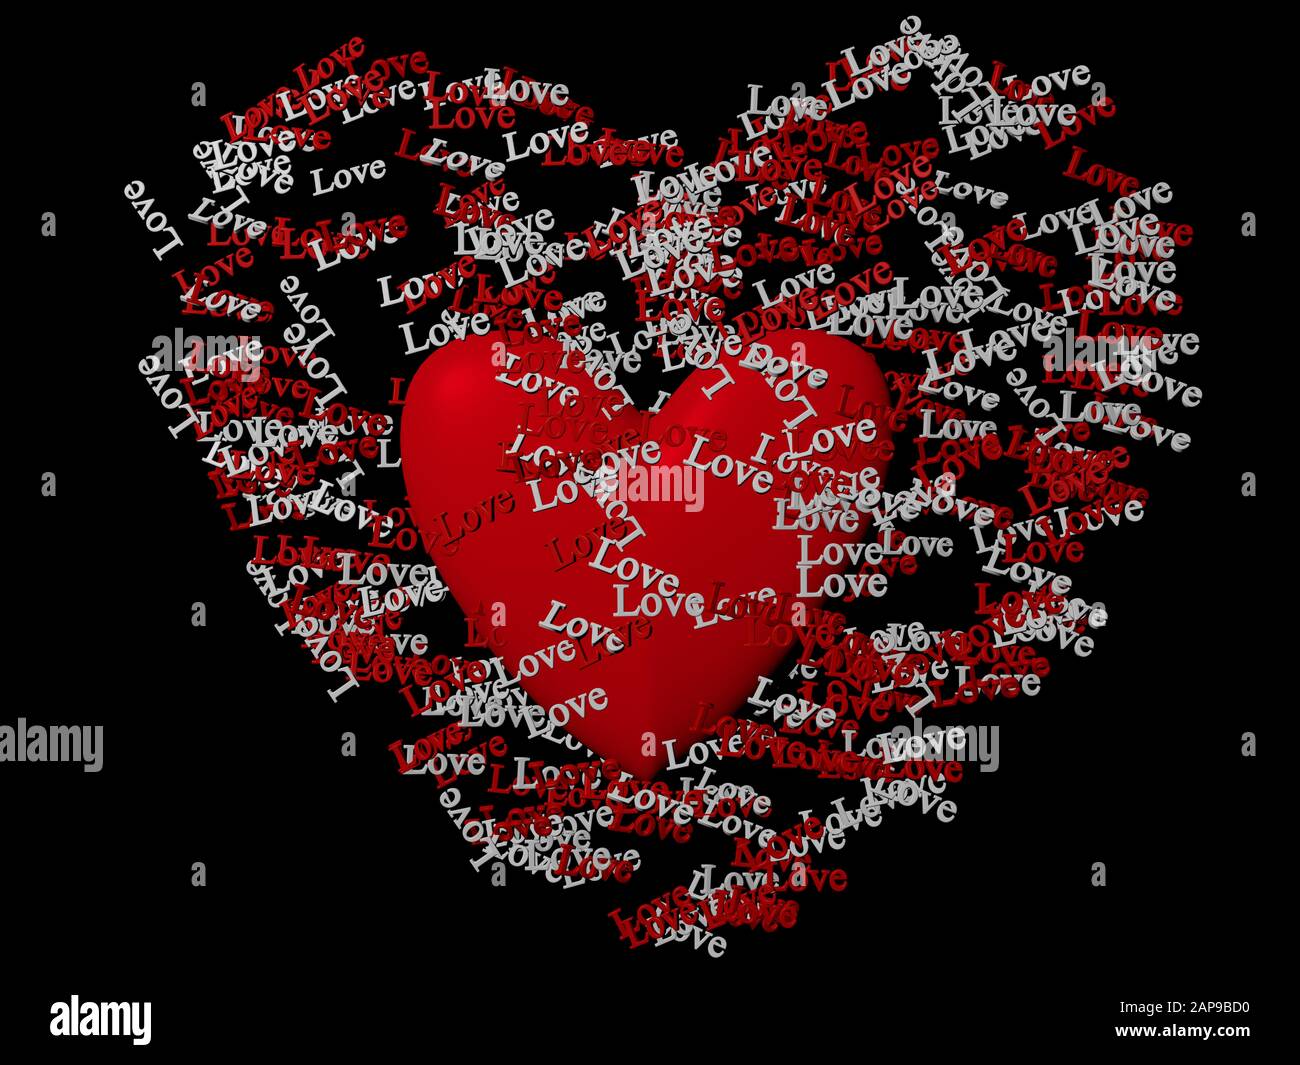 3D rendering of red heart figure and red and white words “Love” floating  around it in a heart shape, on black background Stock Photo - Alamy